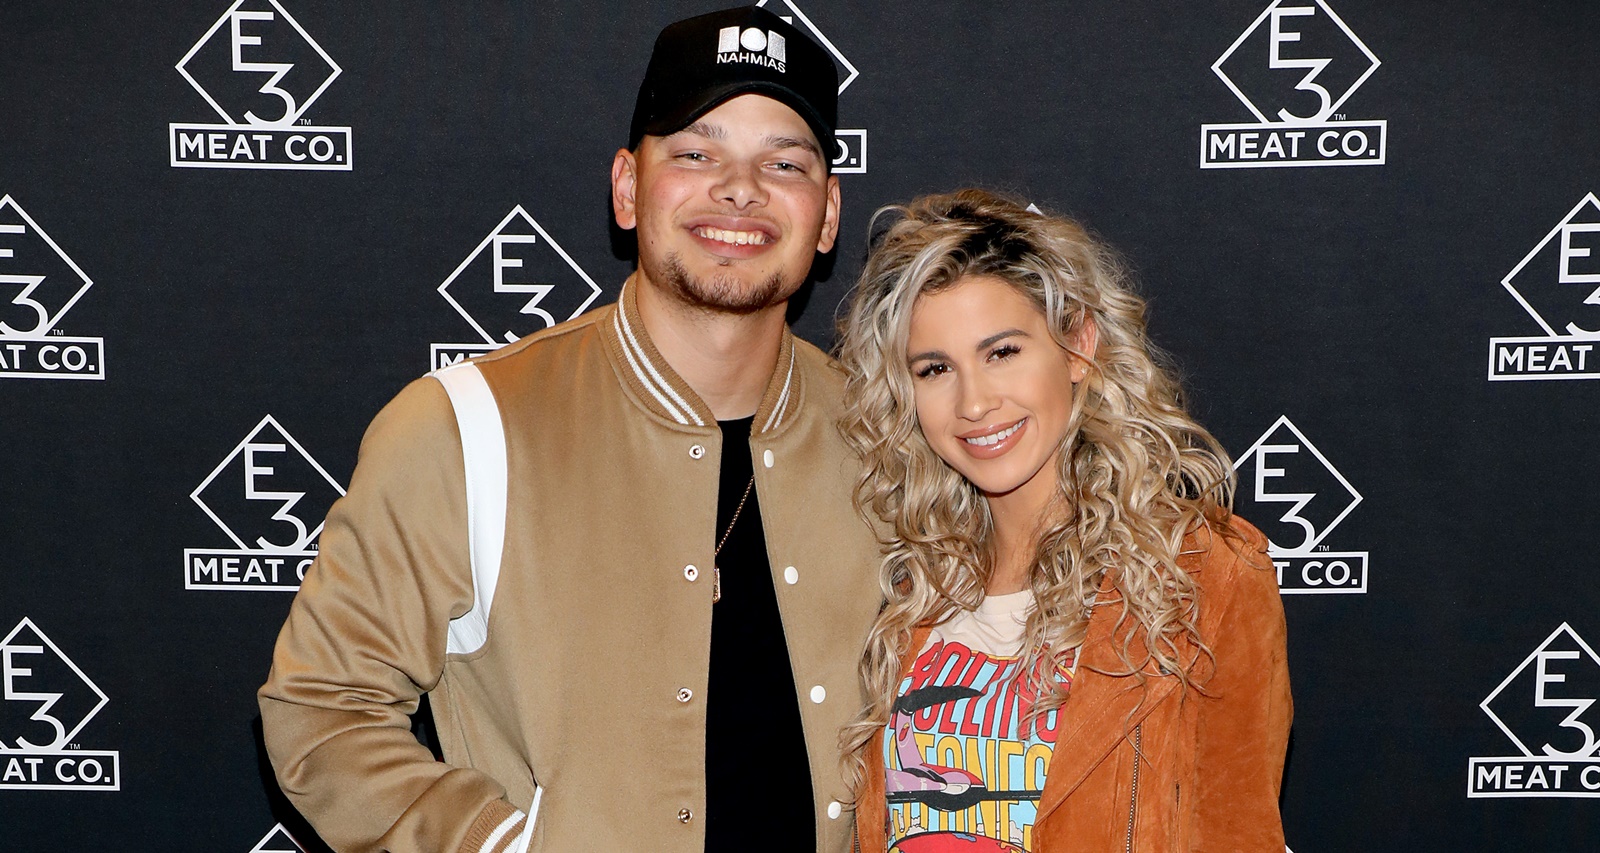 Kane Brown’s Wife: Katelyn Jae Wiki, Age & Facts About The Singer-Songwriter